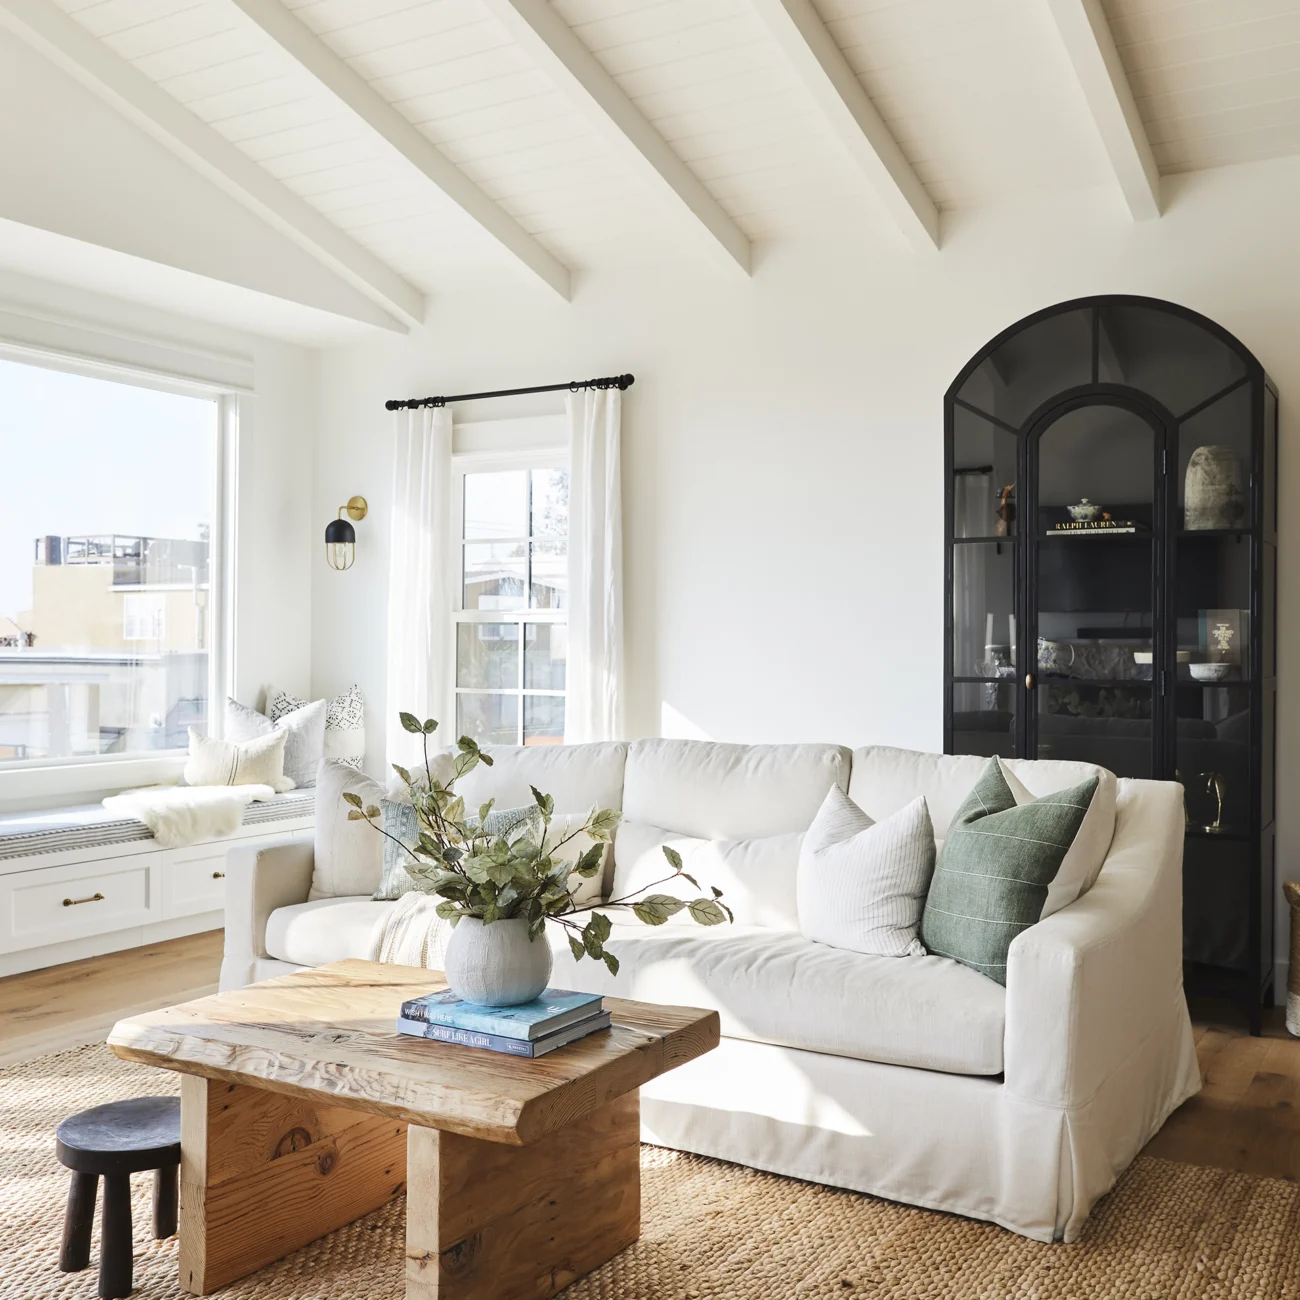 Christine Vroom Interiors | Gentry | Bright, white living room with vaulted ceilings